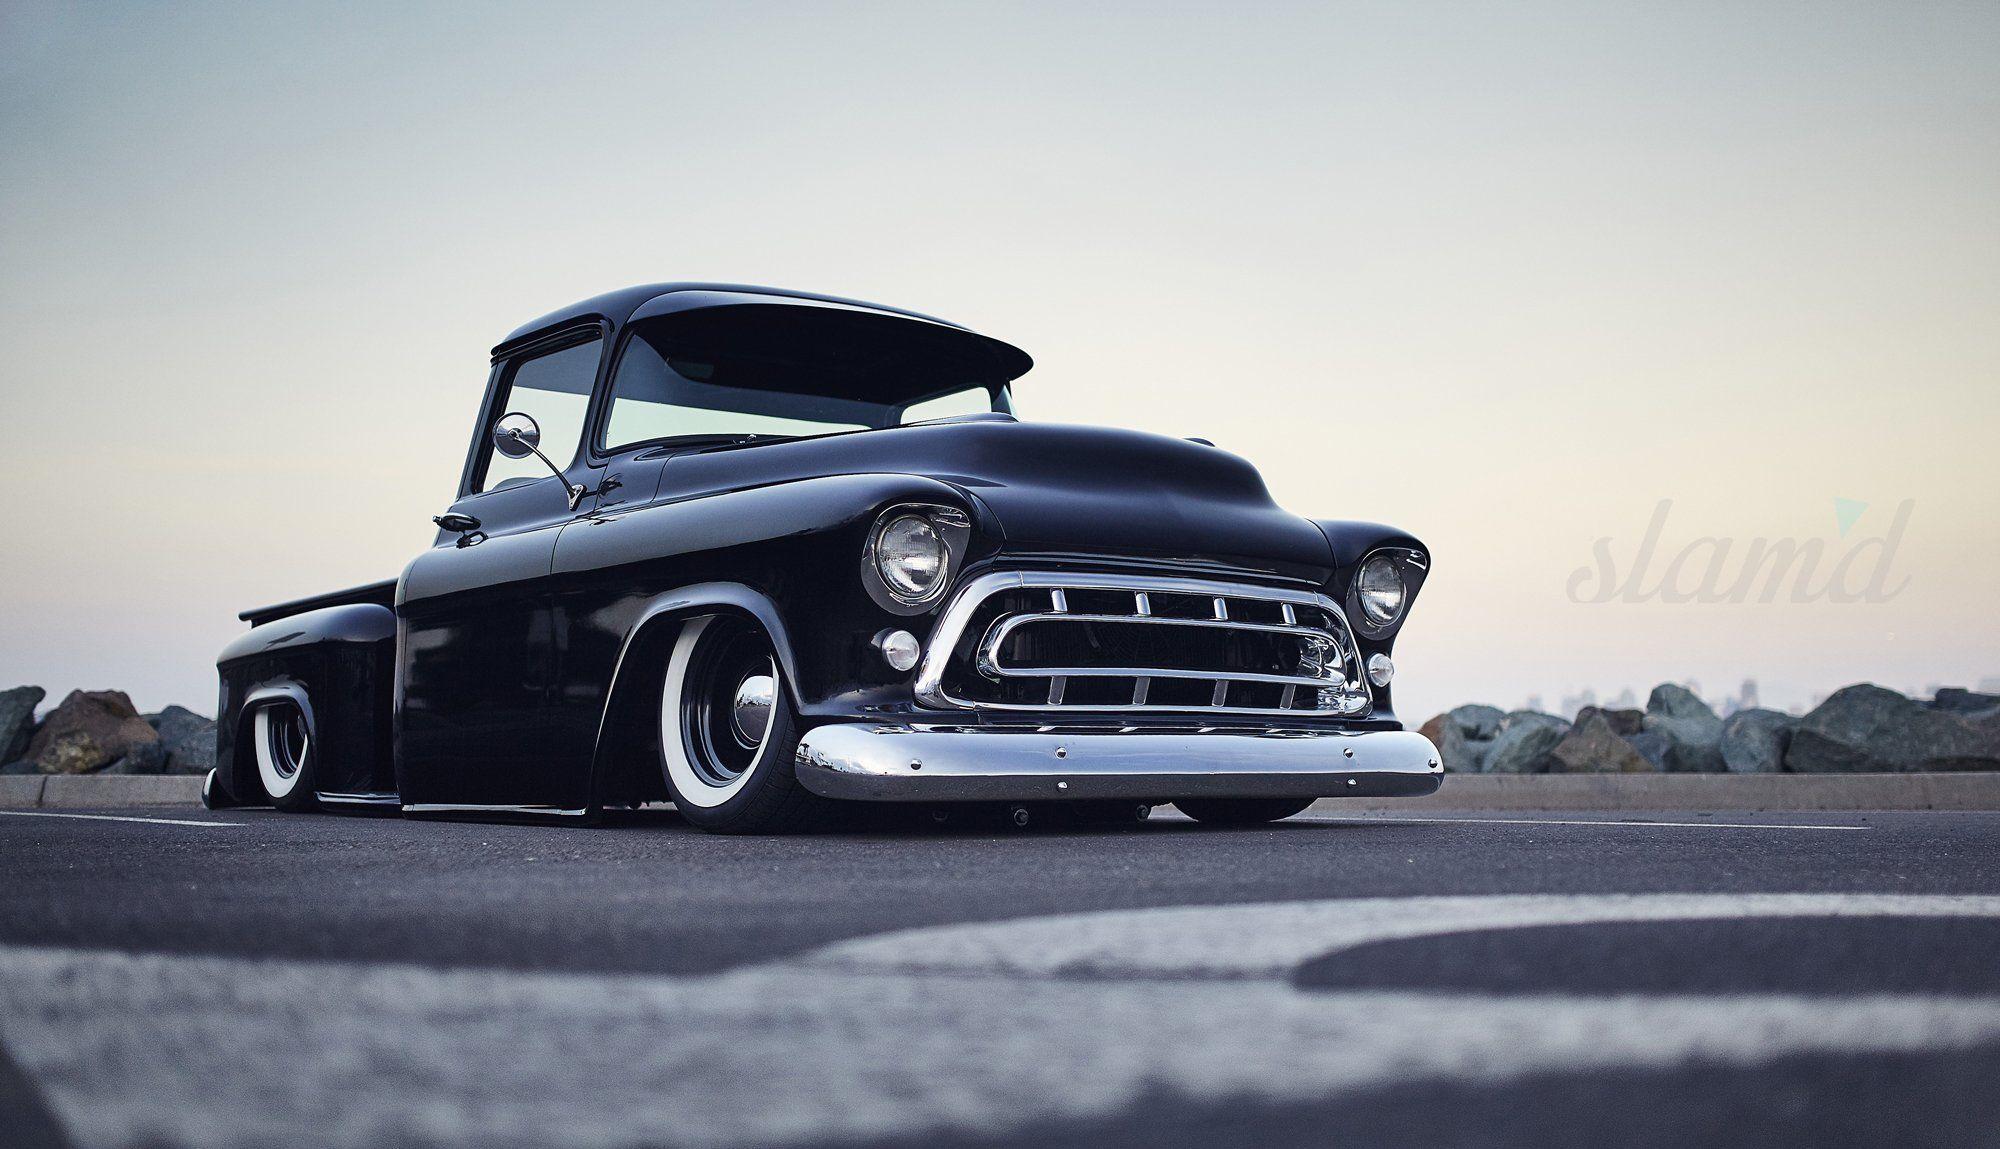 Classic Chevrolet Wallpapers Top Free Classic Chevrolet Backgrounds Wallpaperaccess